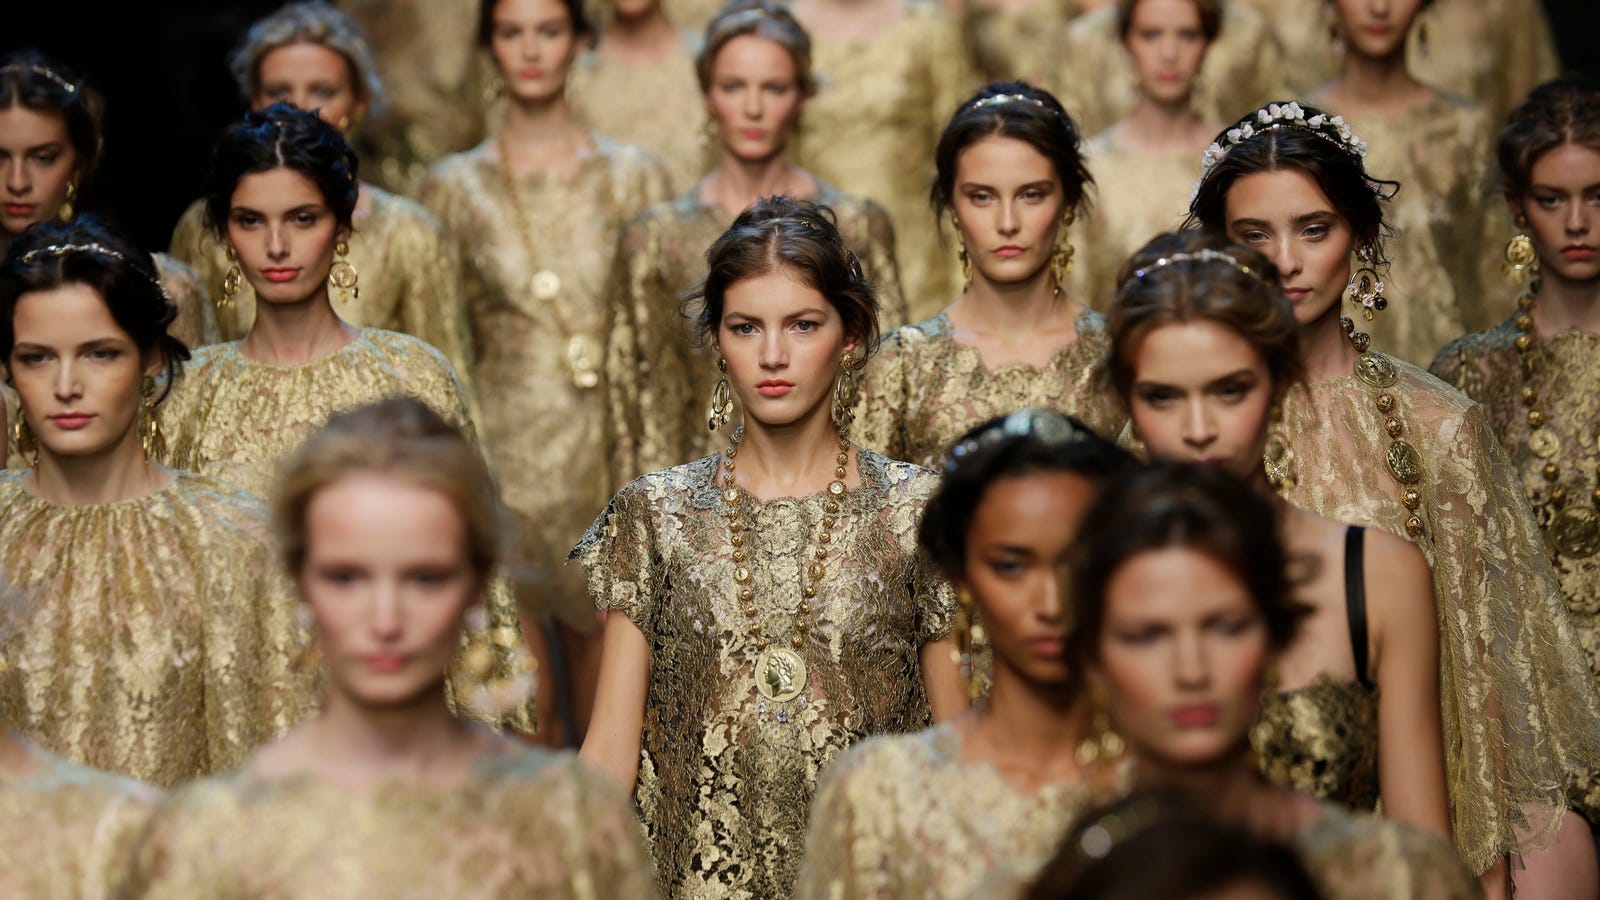 The Next Met Ball Theme Might Be About Fashion and Religion. Good Luck!